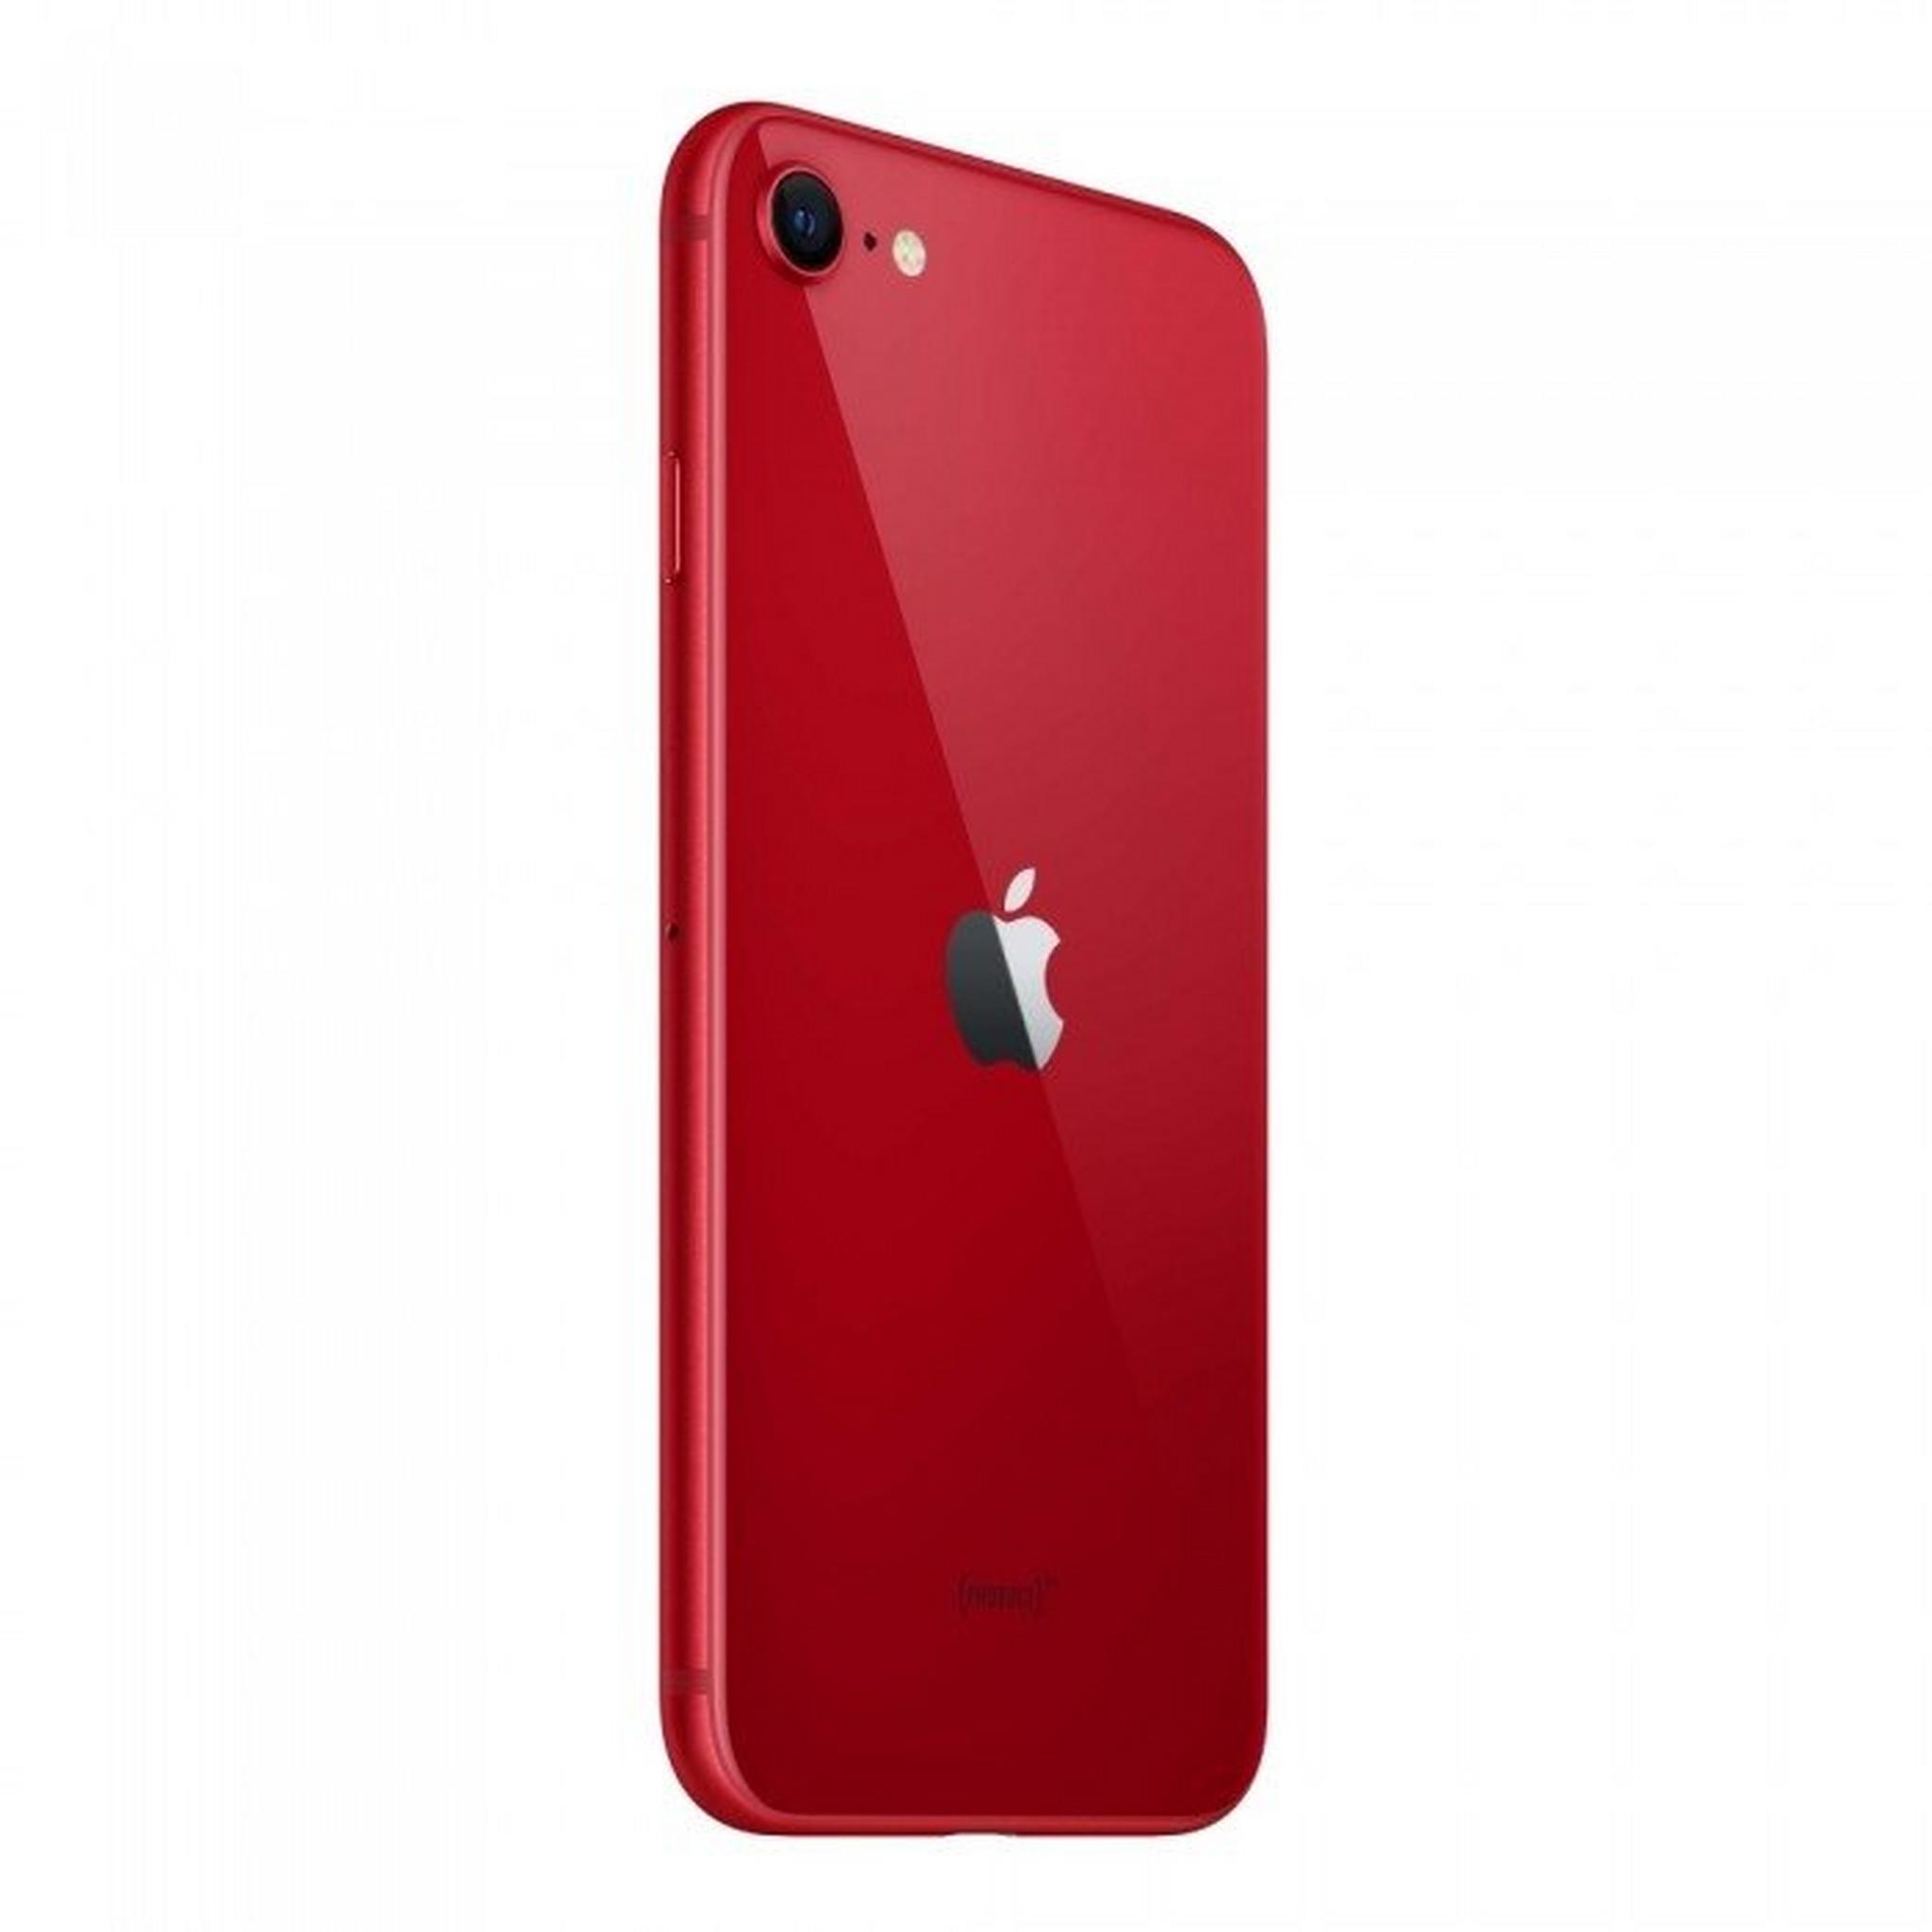 Apple iPhone SE 3rd Gen 128GB - (PRODUCT) RED